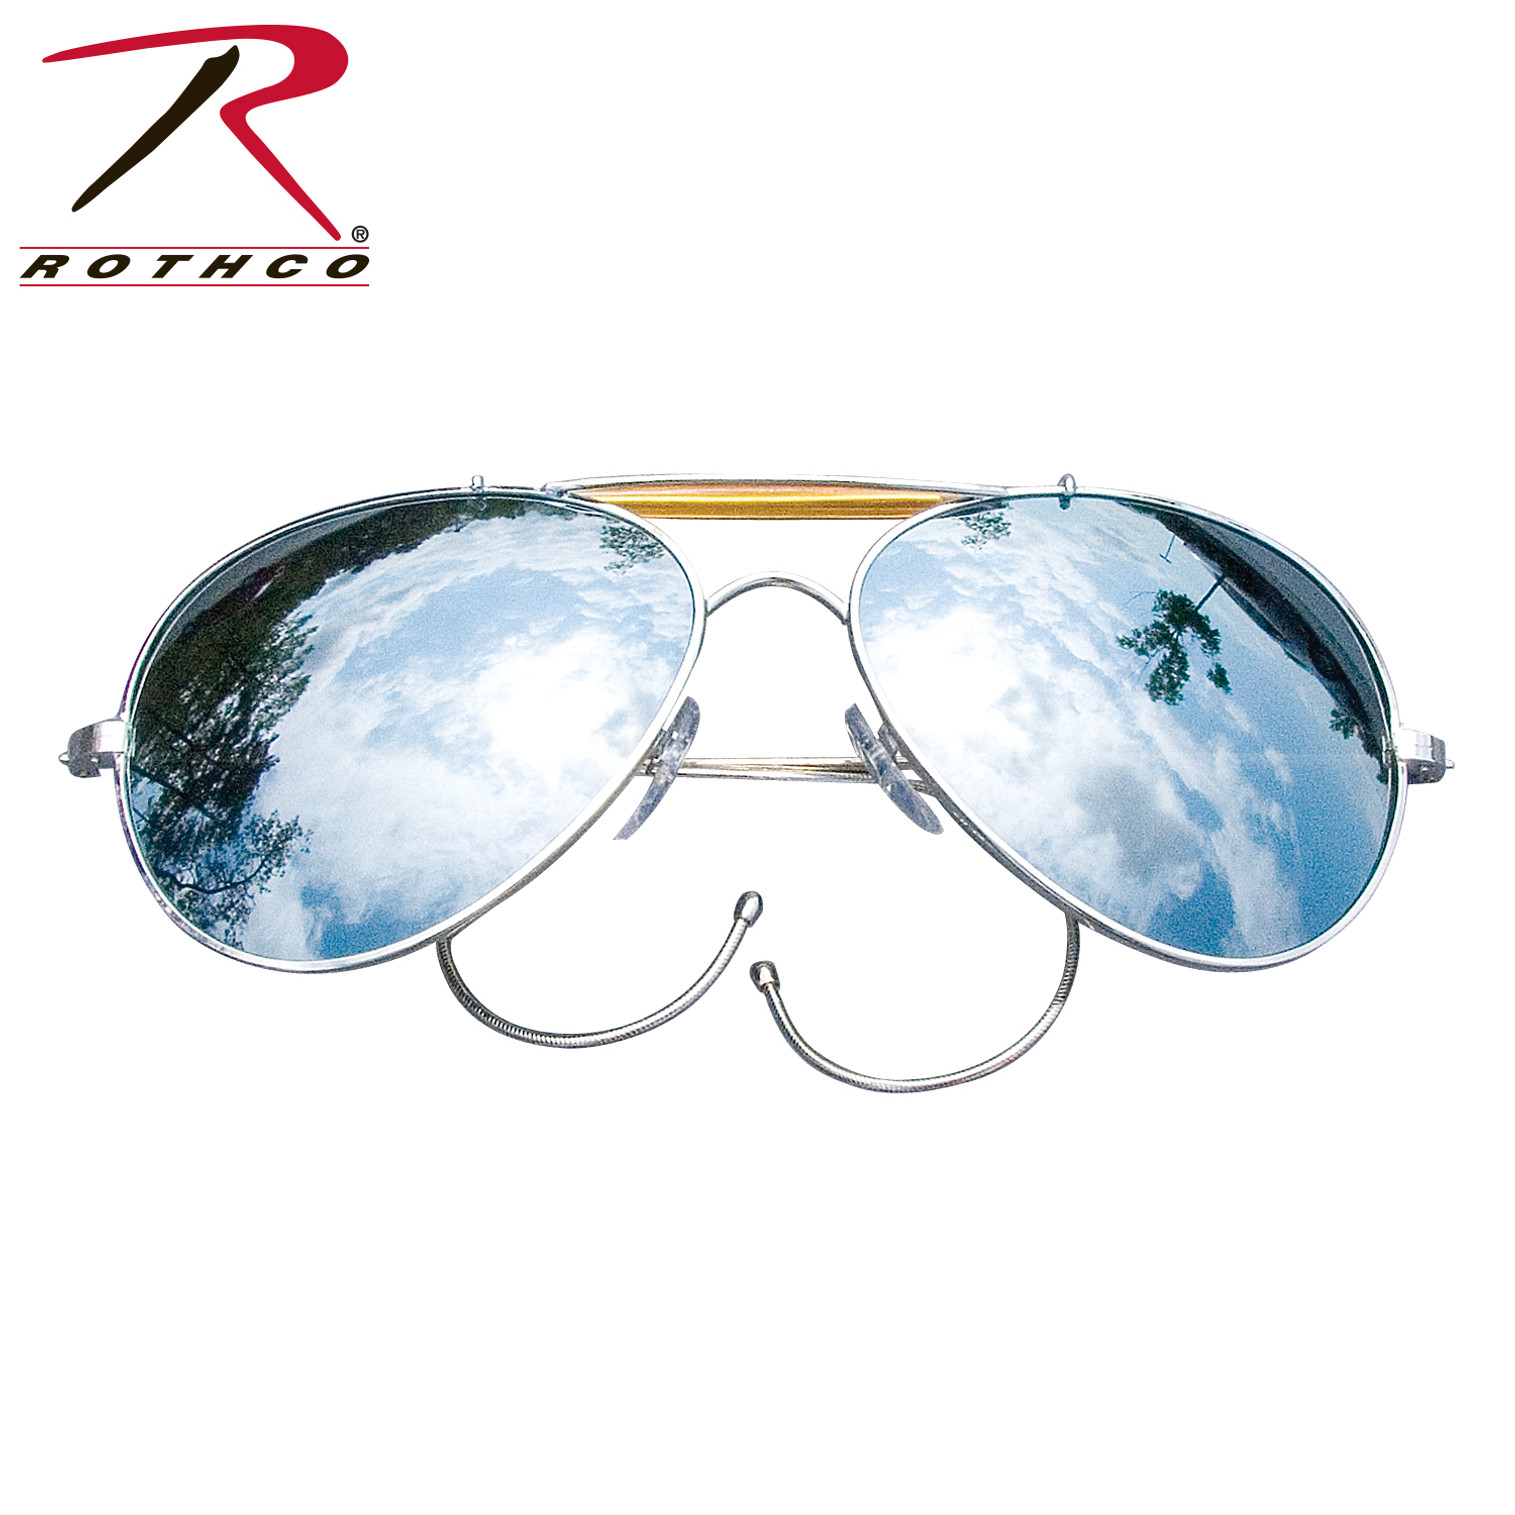 Aviator Air Force Style Sunglasses - Polybagged Only - Mirror